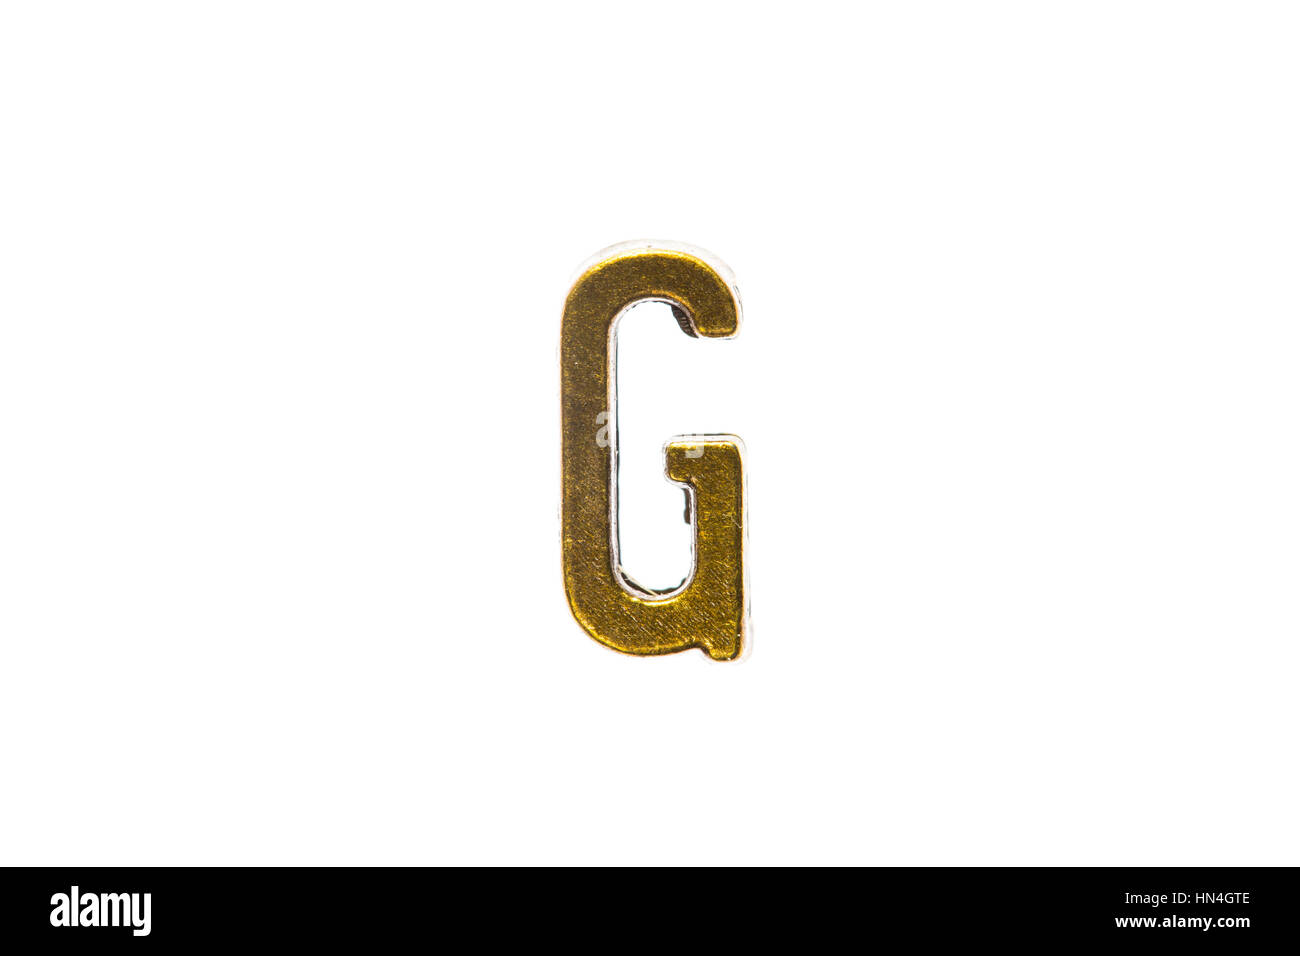 Gold Letter 'G' Classic type retro style vintage capital text golden luxury english isolated on white Stock Photo